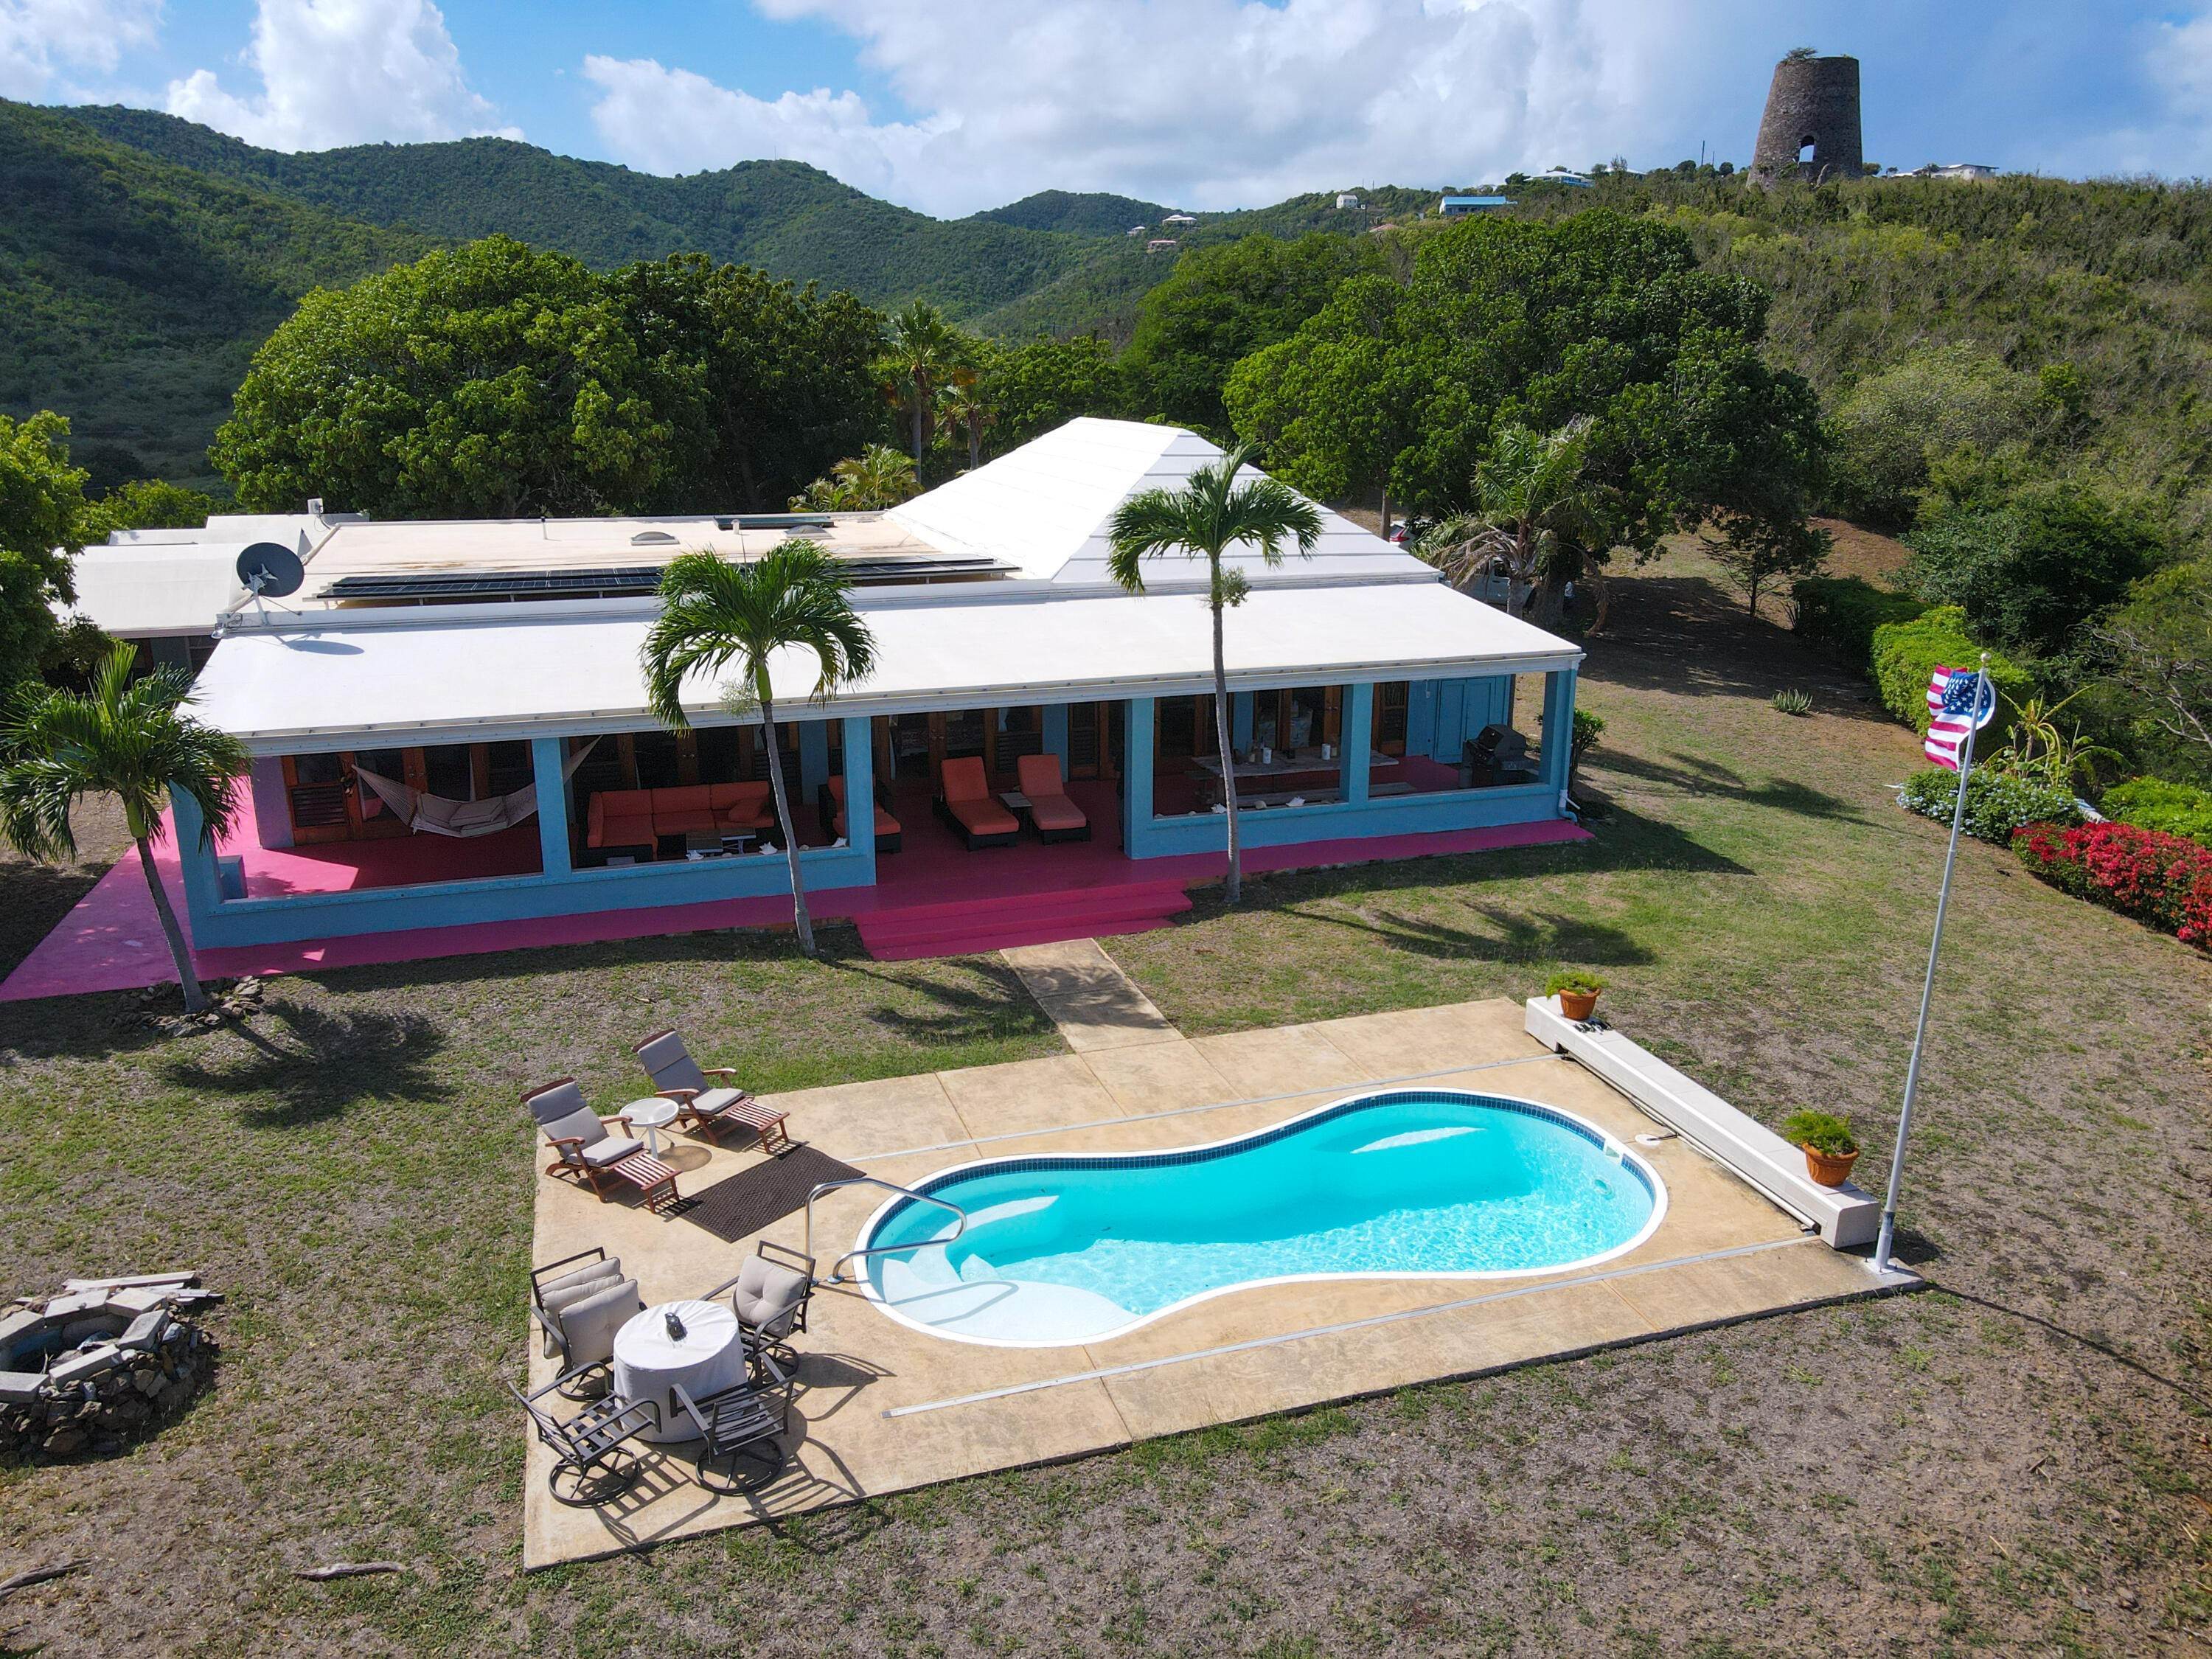 Single Family Homes for Sale at 71 Cotton Valley EB St Croix, Virgin Islands 00820 United States Virgin Islands